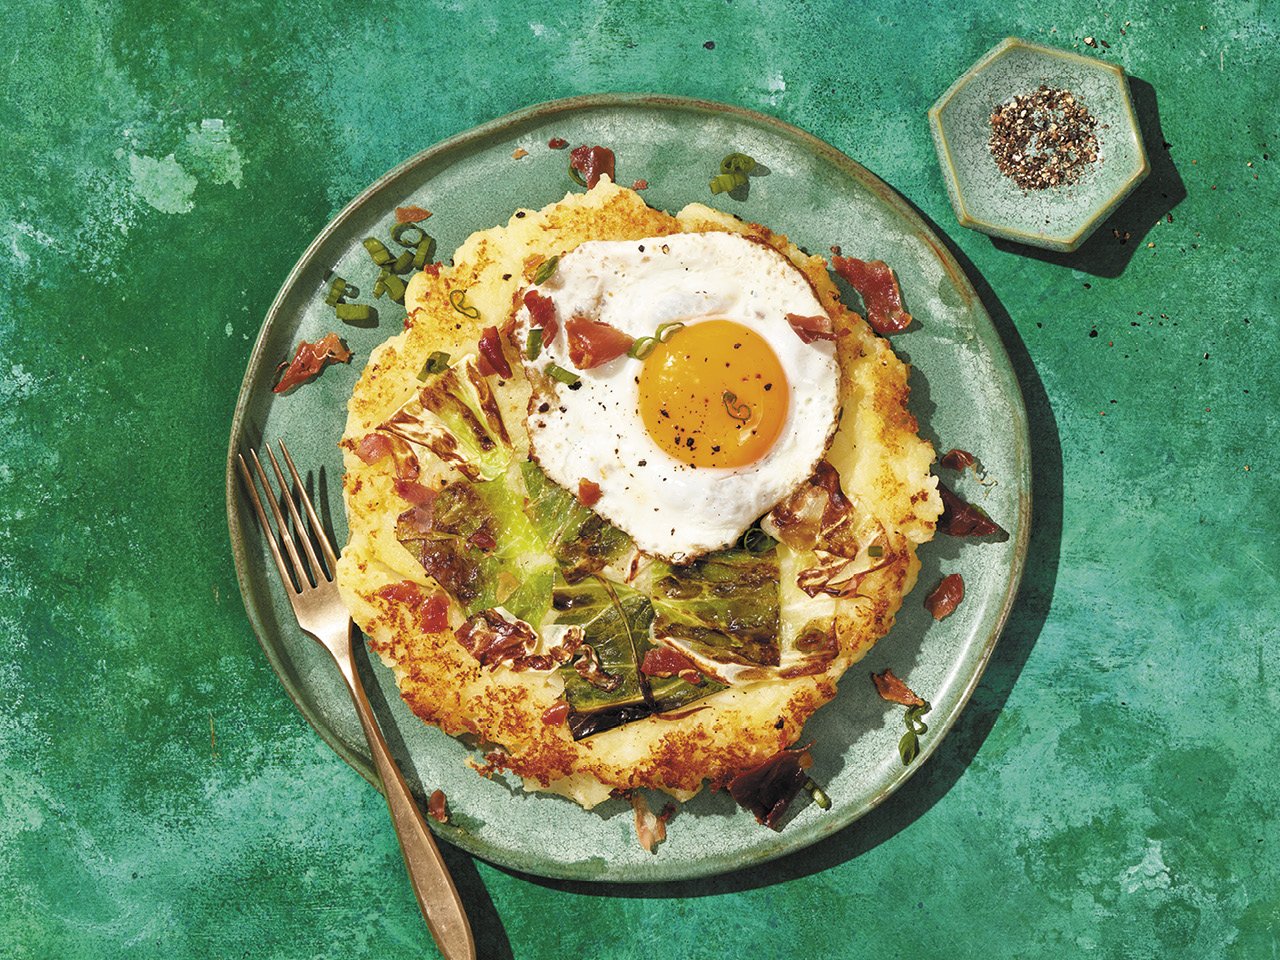 Bubble and squeak—made with leftover steamed cabbage and mashed potatoes—served on a plate with a fried egg